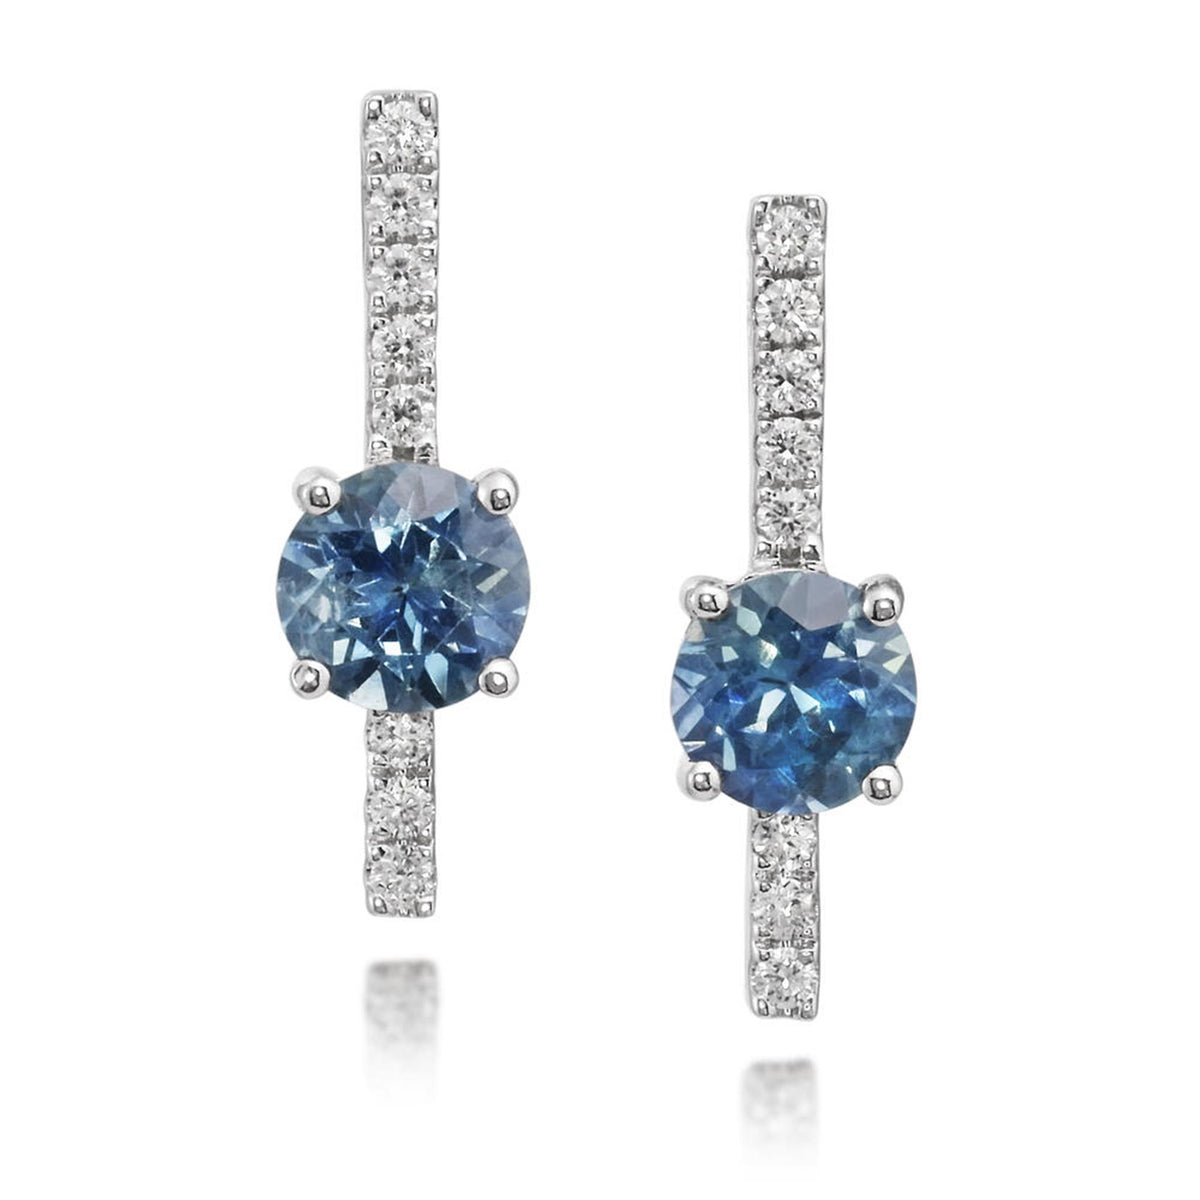 14Kt White Gold Drop Earrings Gemstone Earrings With 1.18ct Sapphires